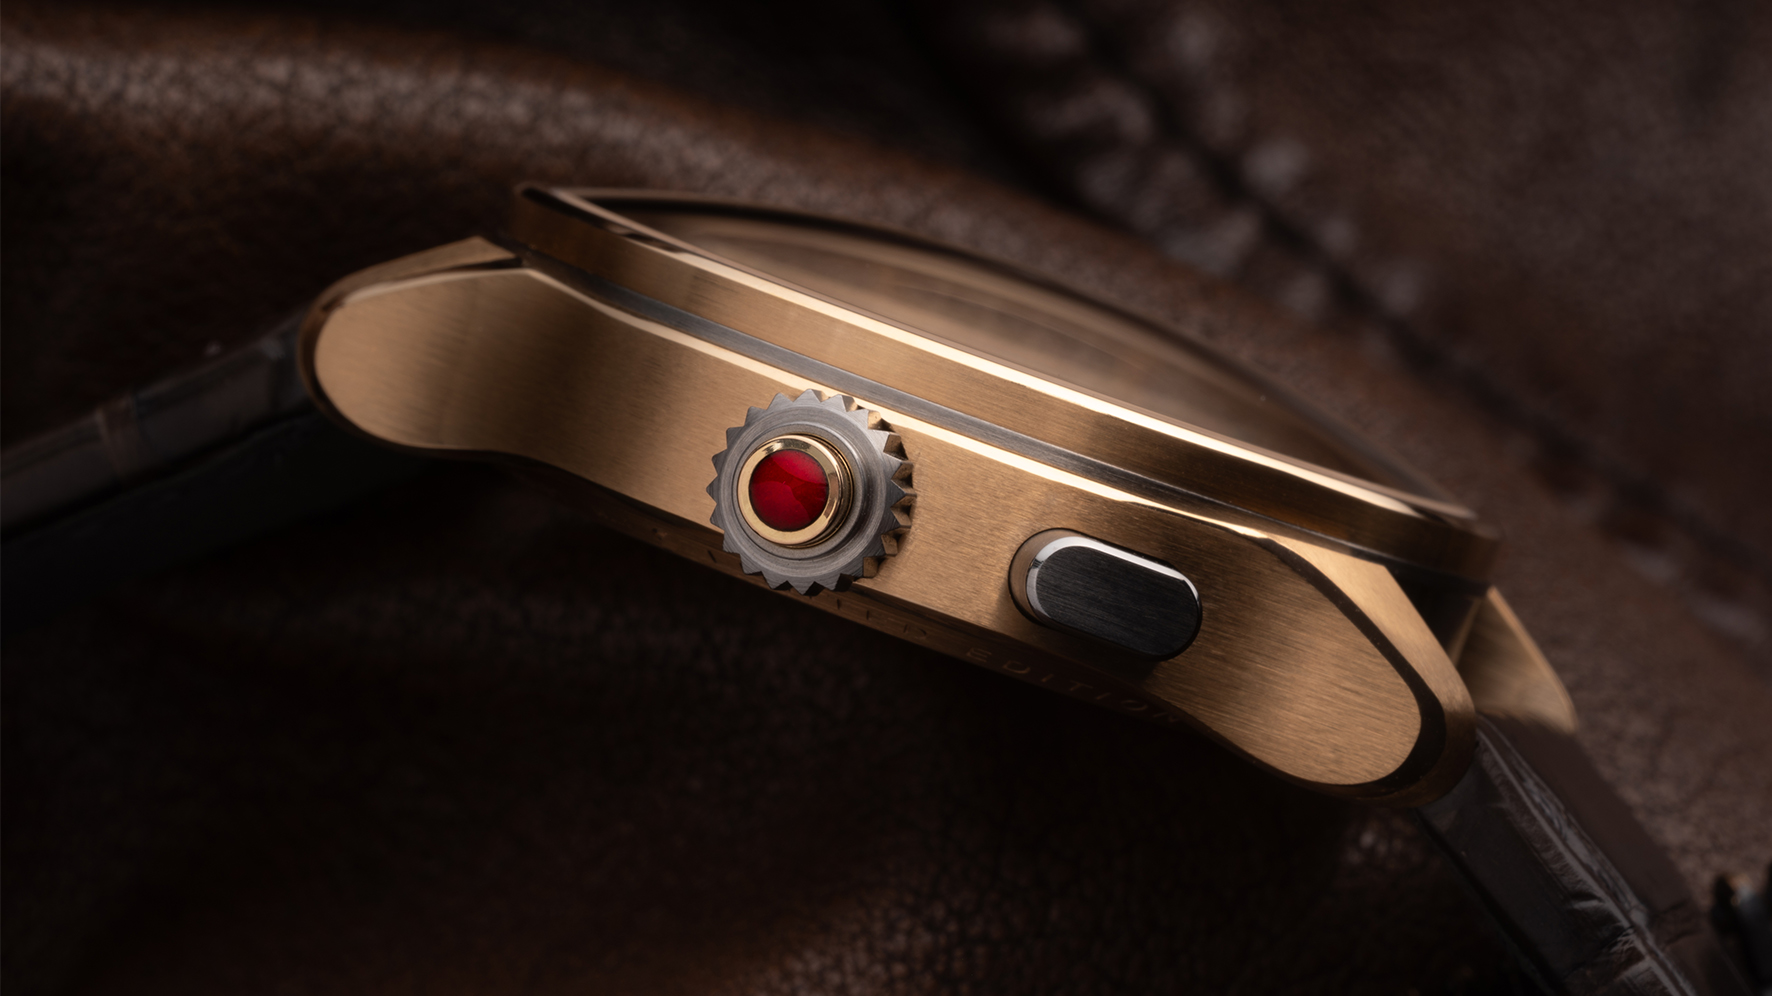 Leica_Watch_ZM_1_Gold_Limited_Edition_Ambient_06_HiRes_Kopie.jpg